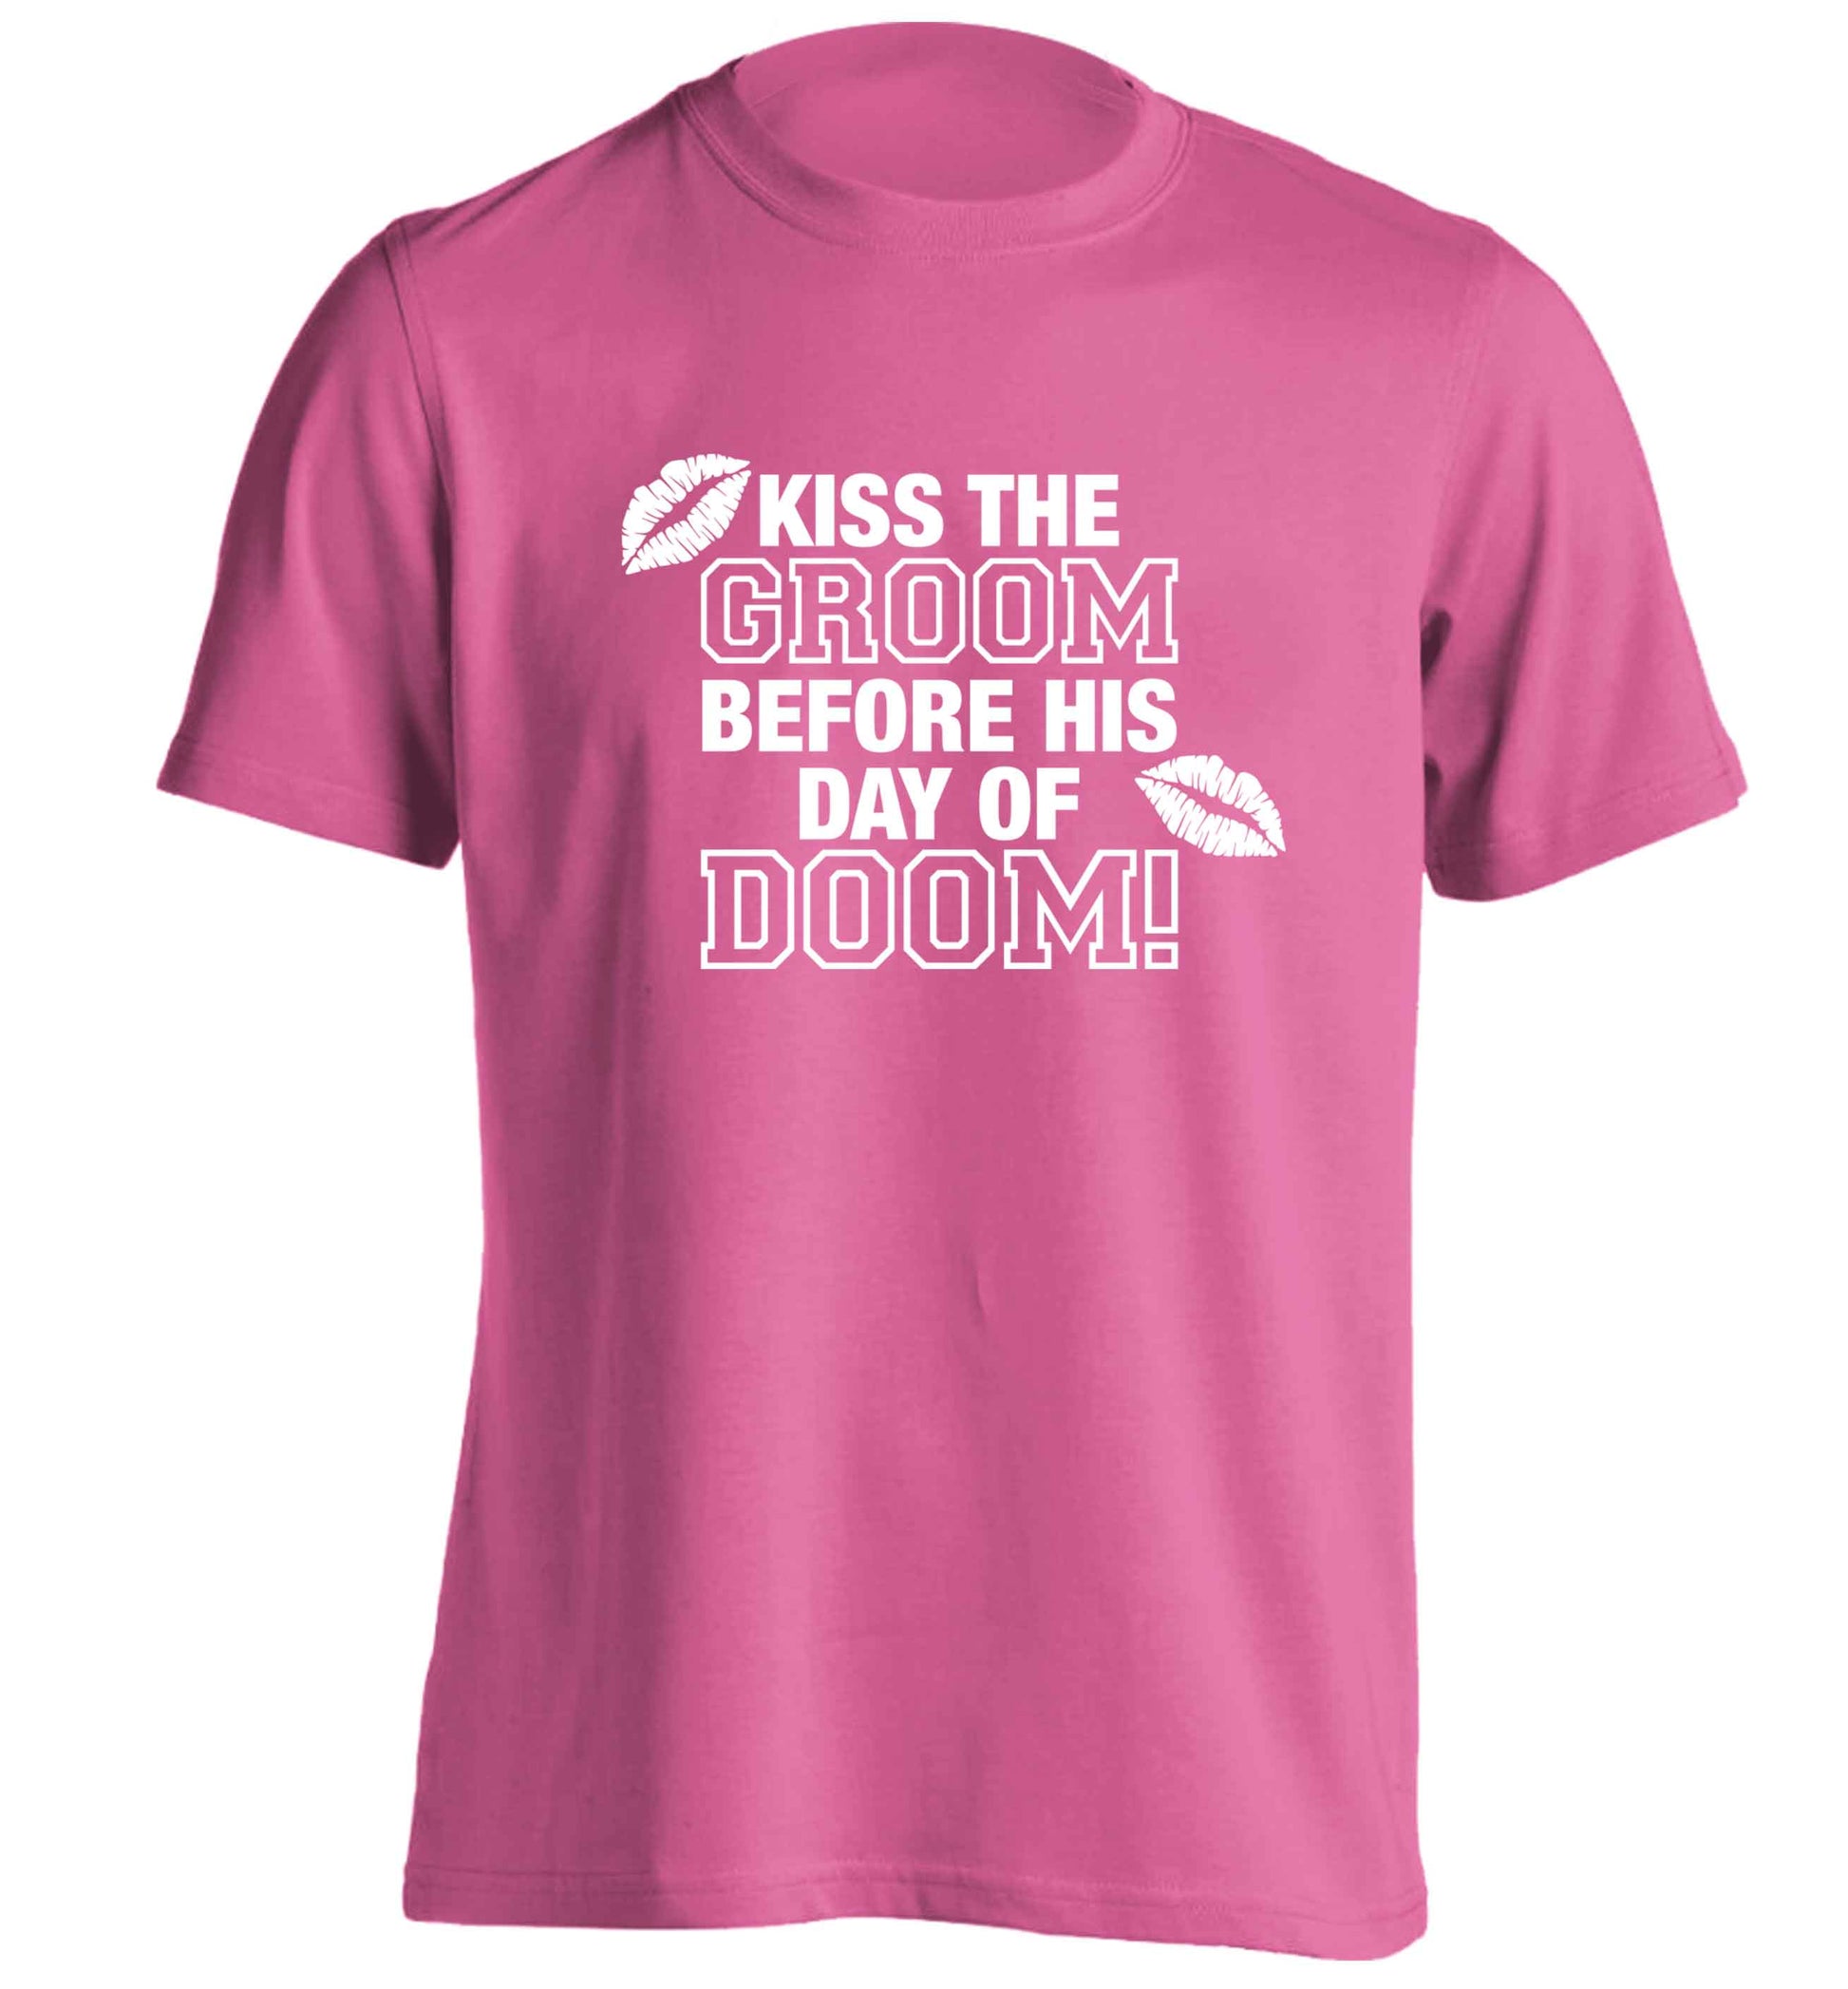 Kiss the groom before his day of doom! adults unisex pink Tshirt 2XL